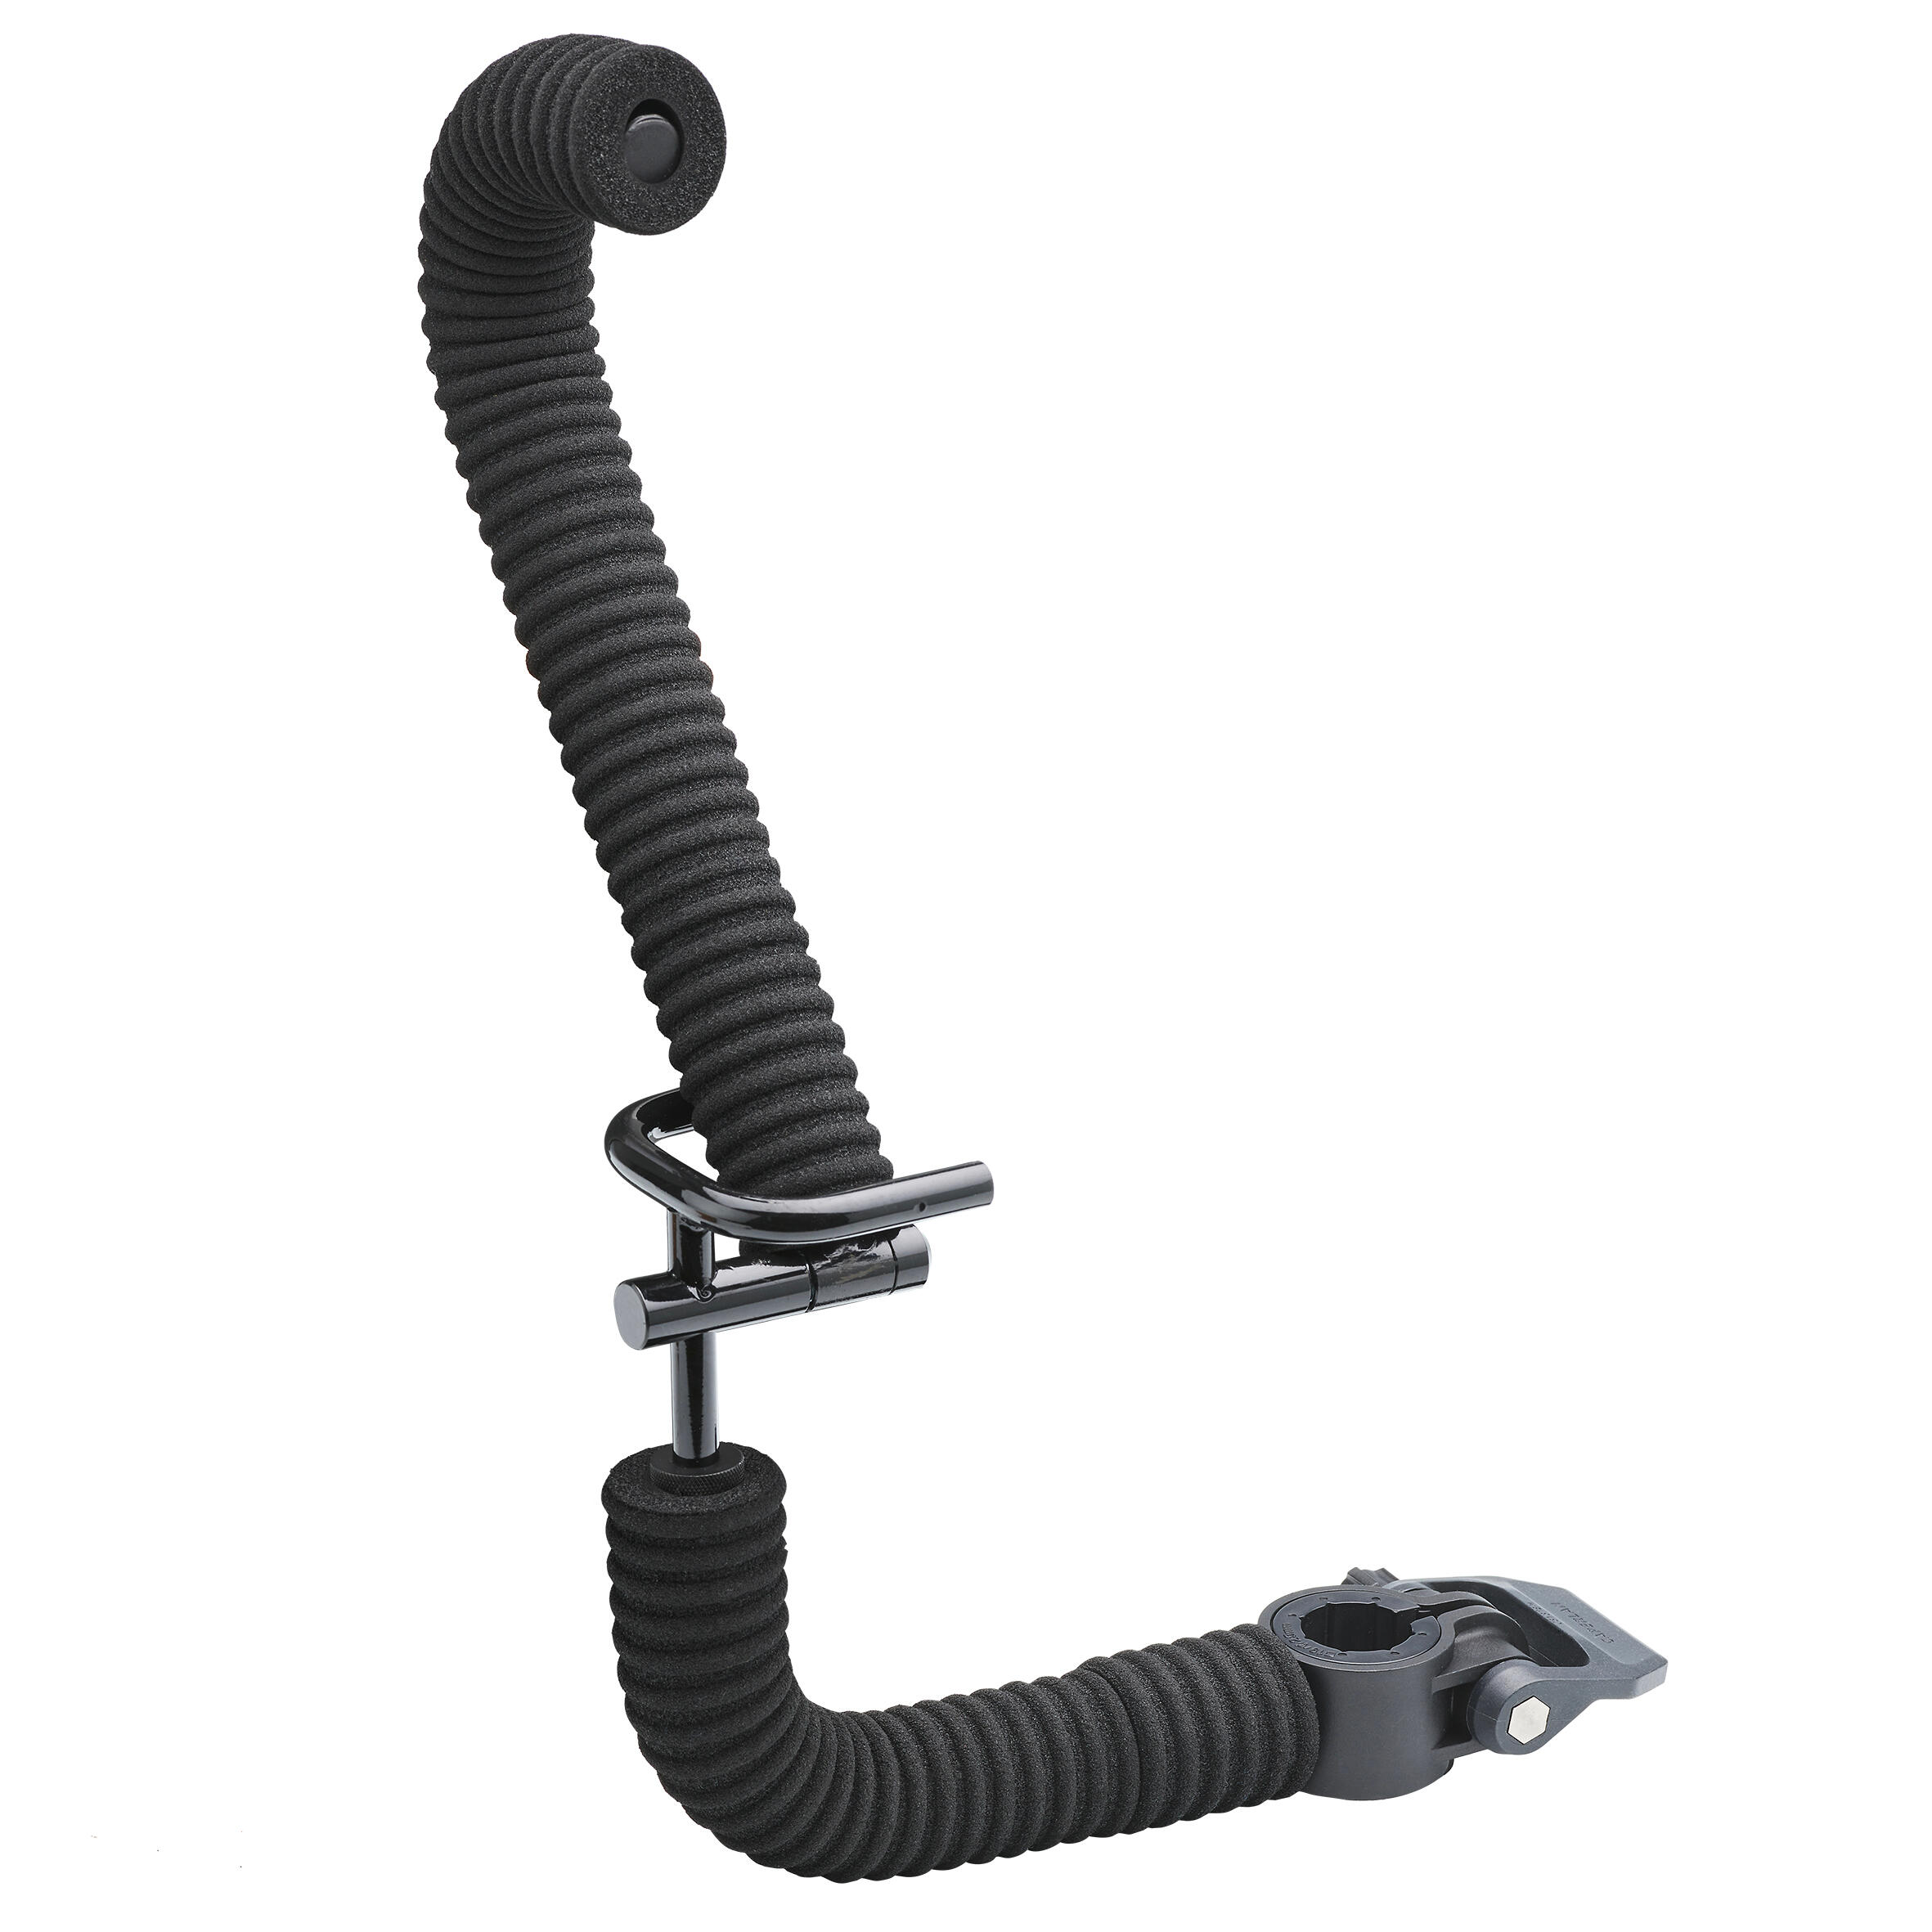 INNOVATIVE REAR ROD REST FOR CSB BPS D25 D36 FISHING STATIONS 1/5